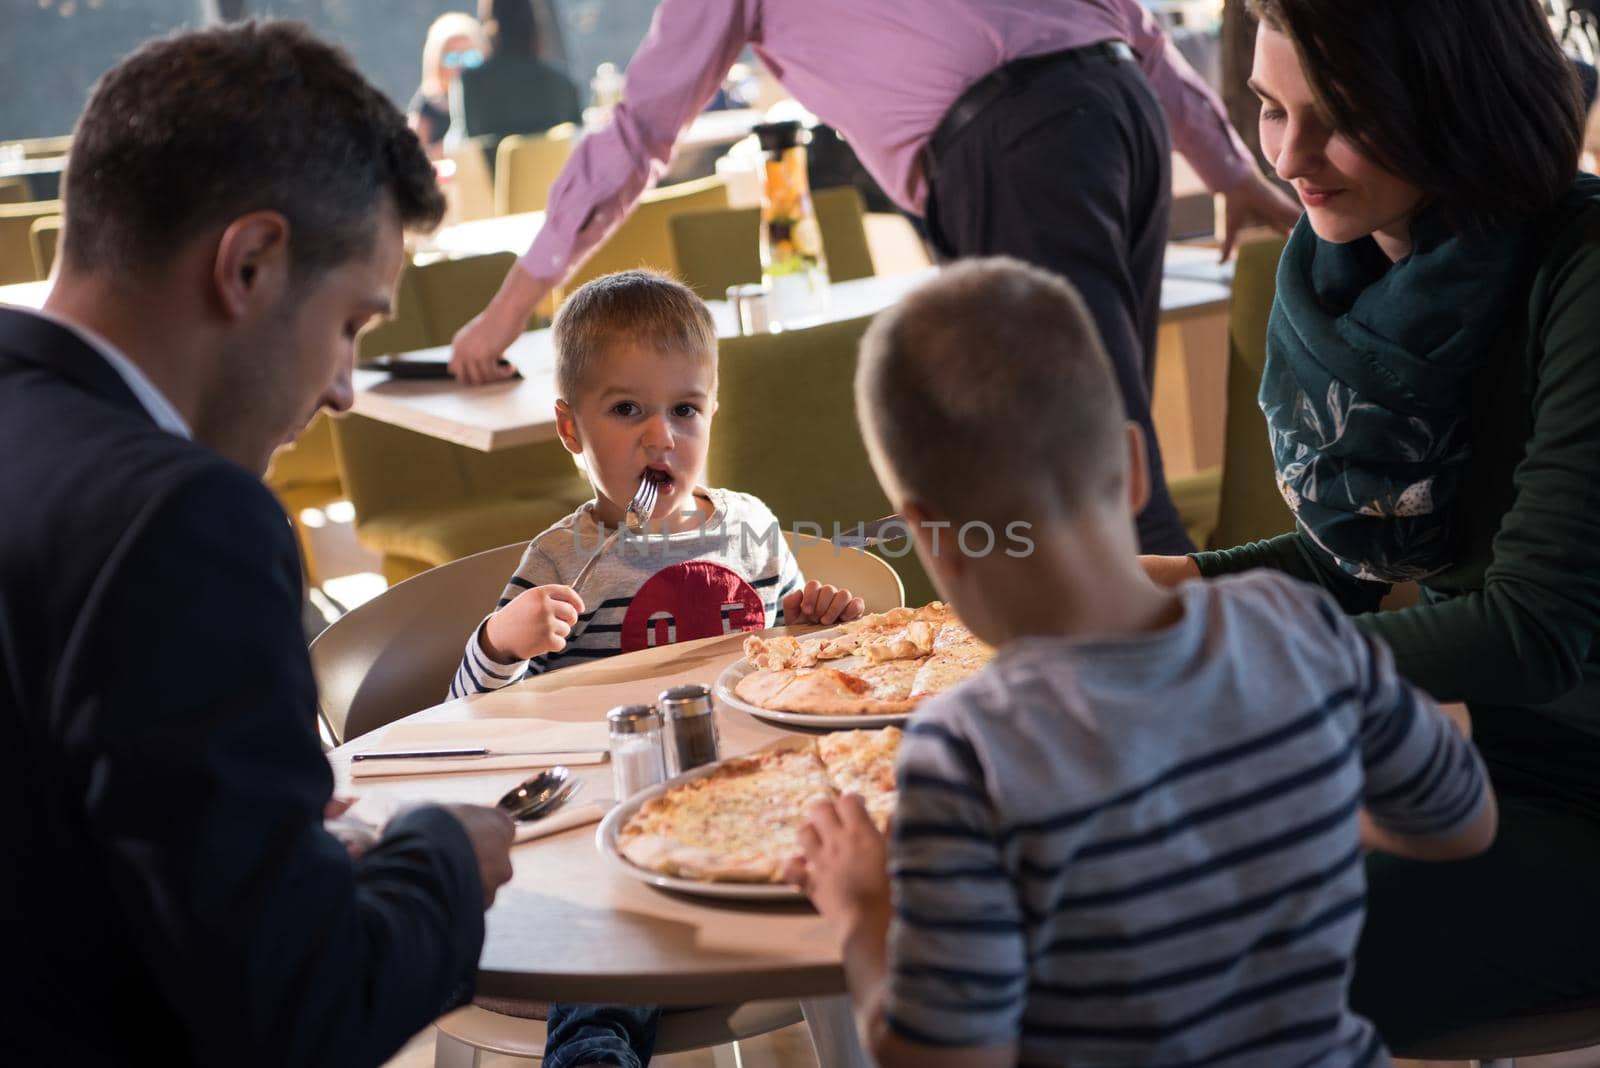 Young parents enjoying lunch time with their children at a luxury restaurant